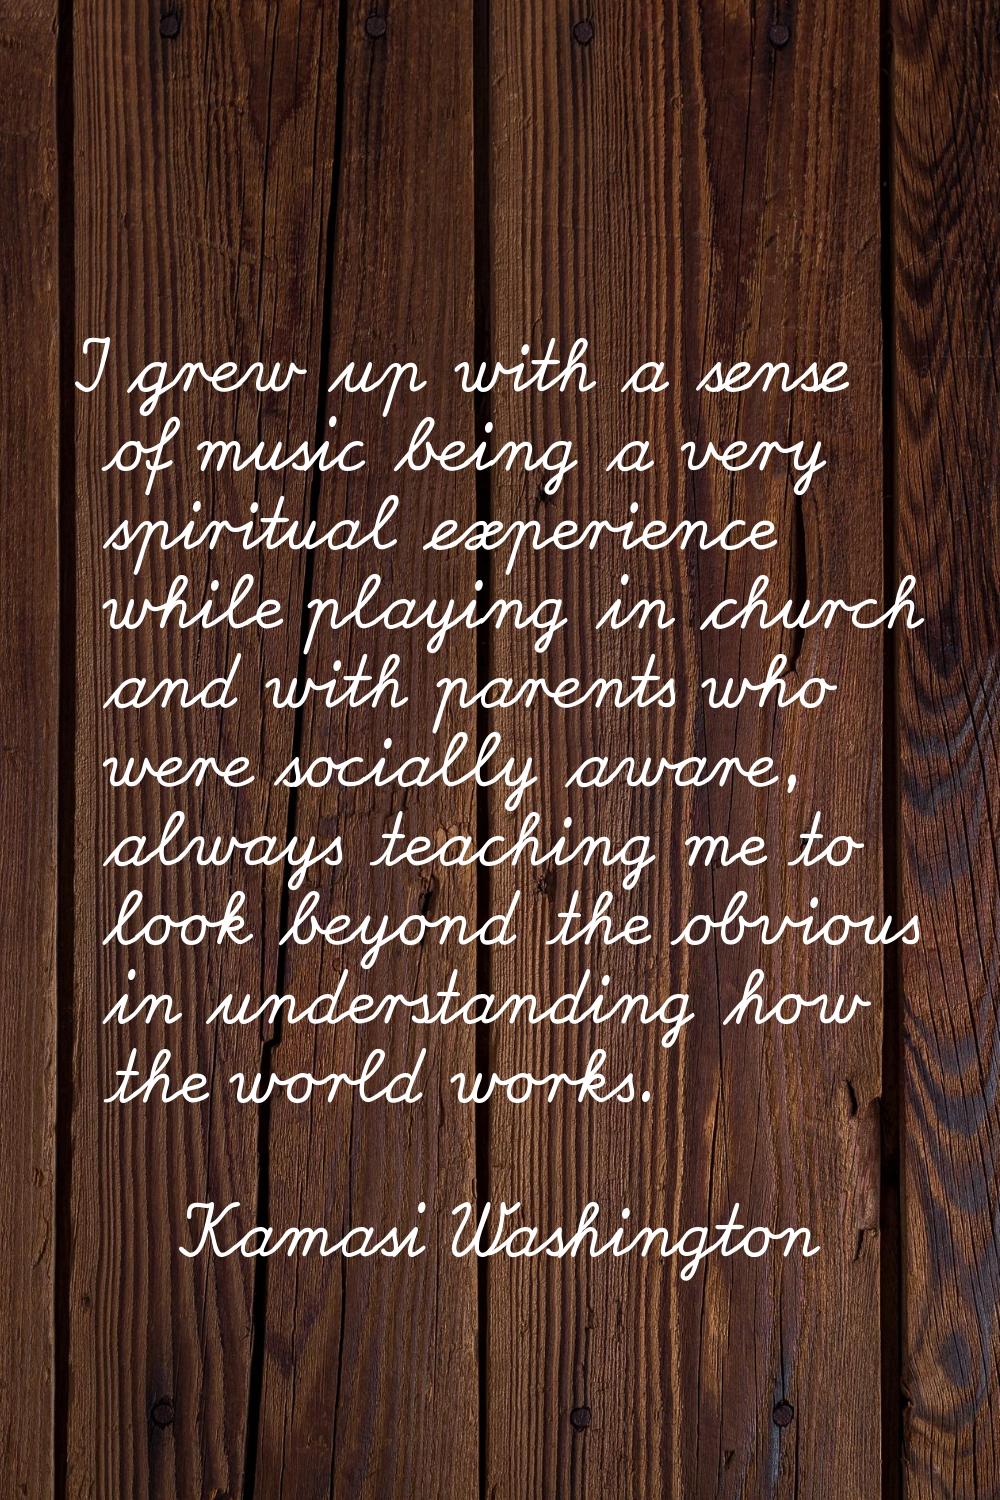 I grew up with a sense of music being a very spiritual experience while playing in church and with 